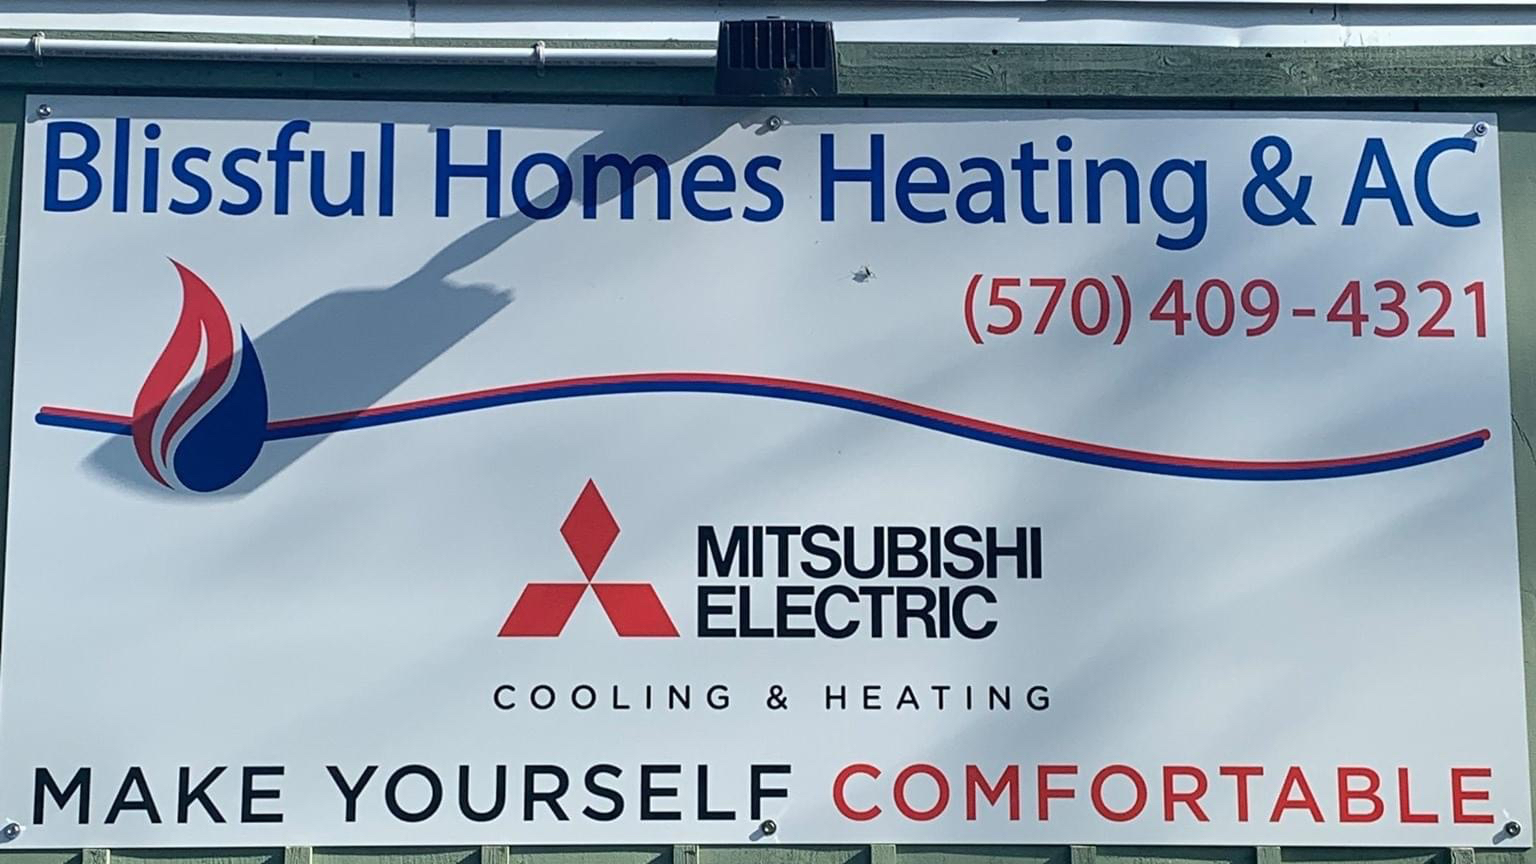 Blissful Homes Heating & Ac